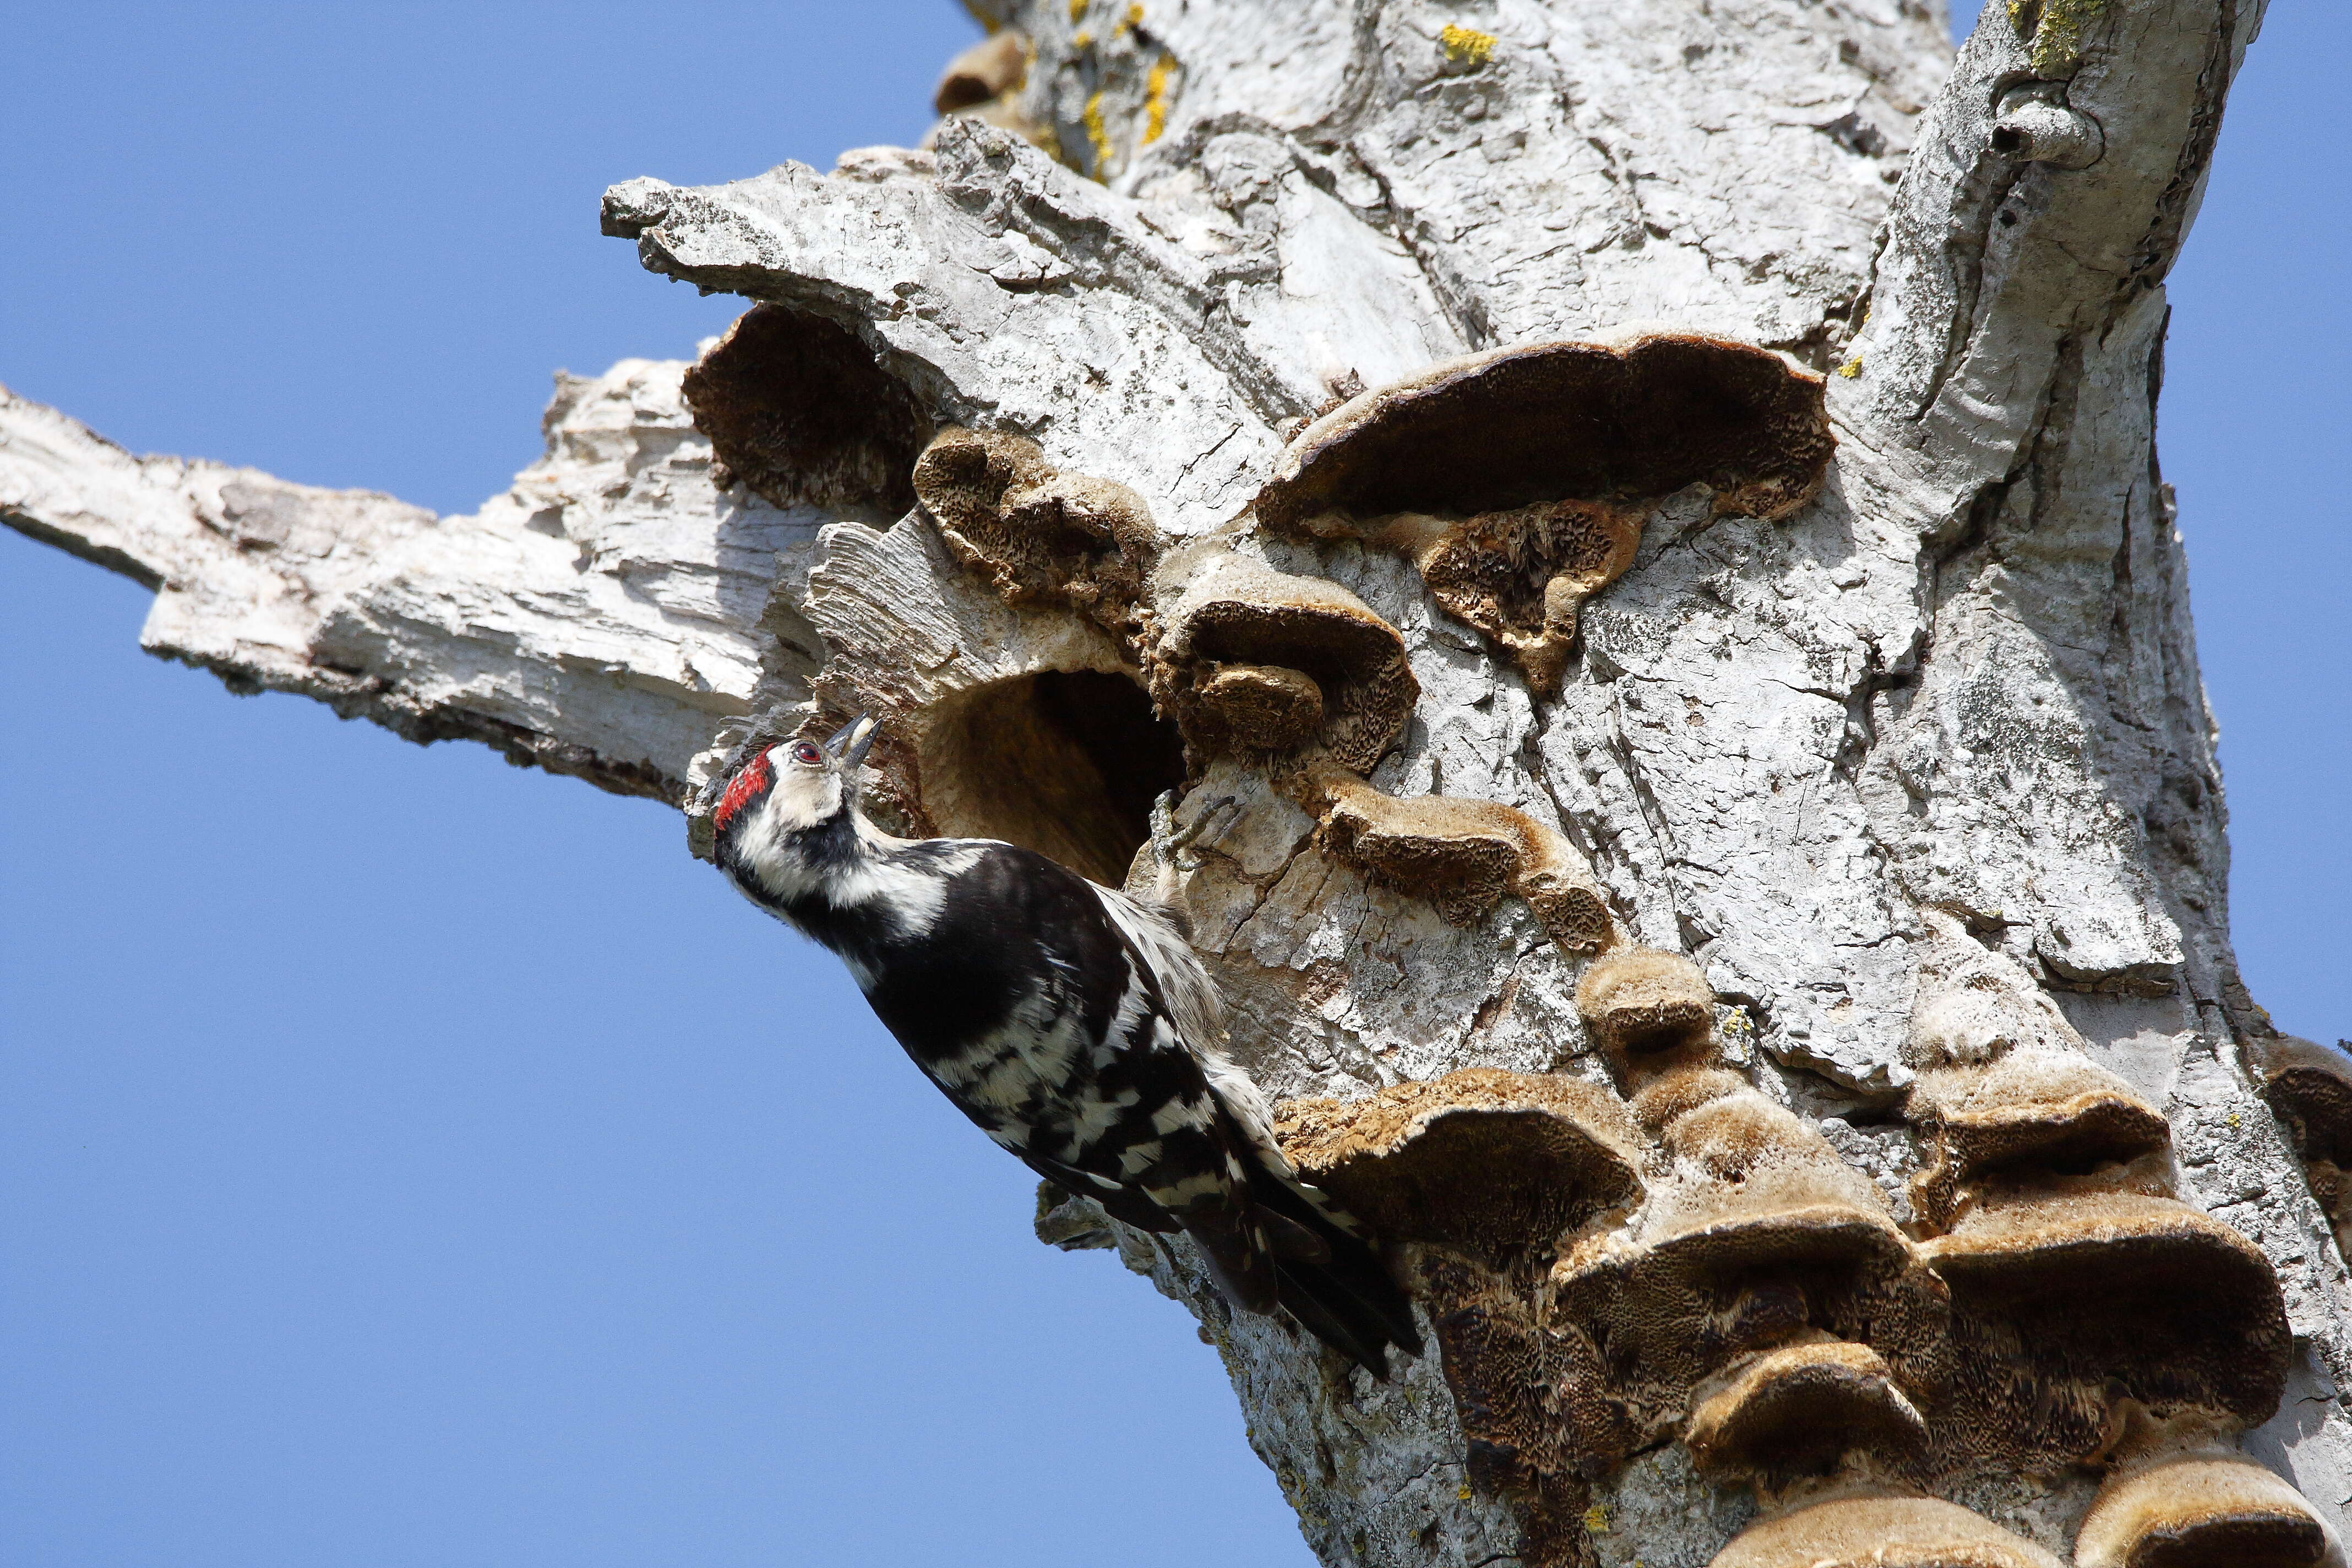 Image of Lesser Spotted Woodpecker